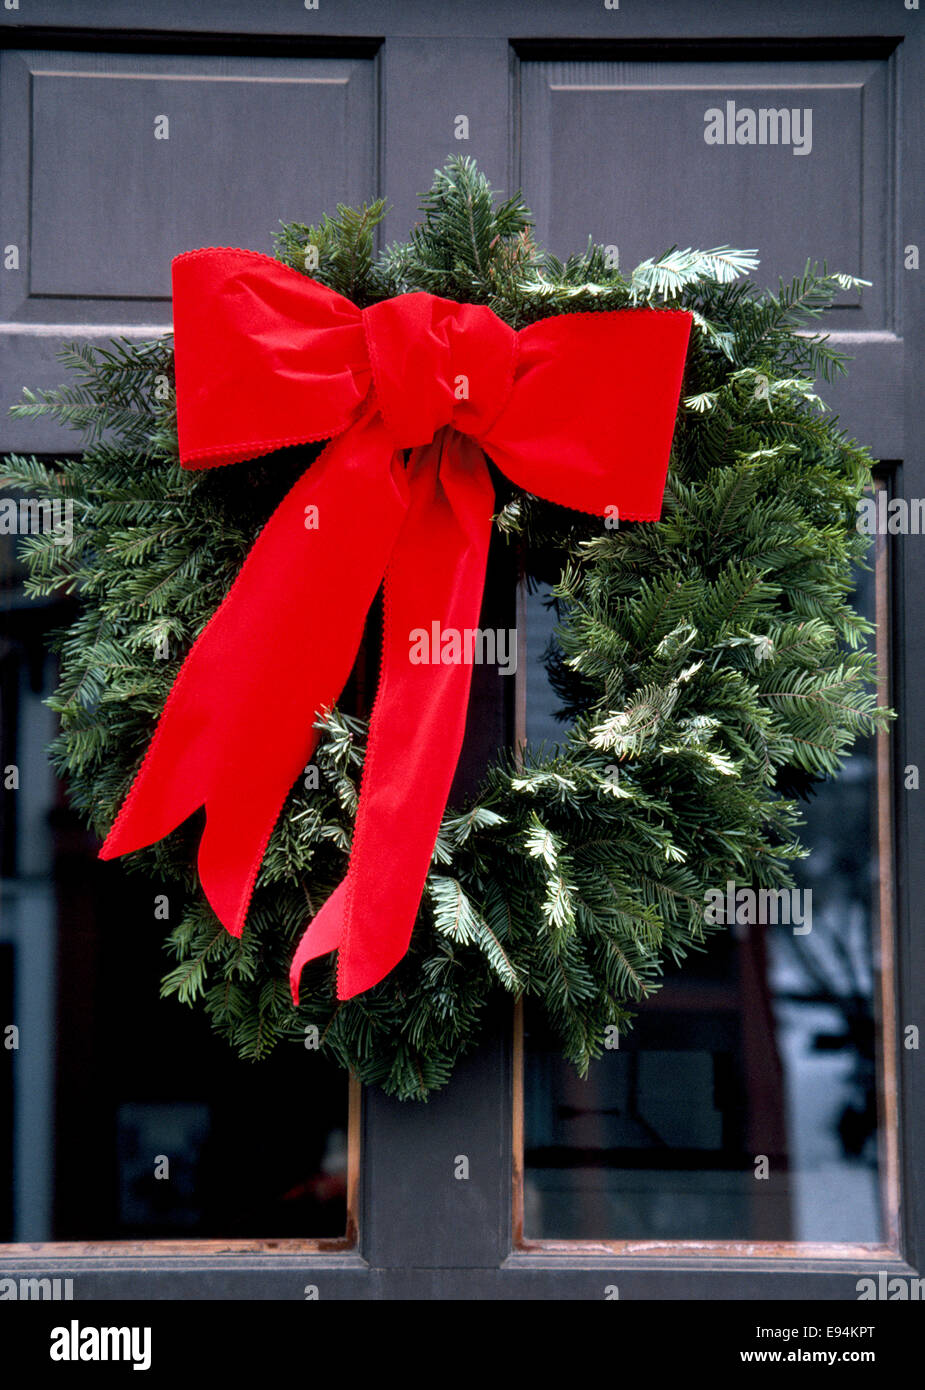 A big bright red holiday bow attached to a wreath of evergreens decorates the entrance door to a house in the USA at Christmastime. Stock Photo